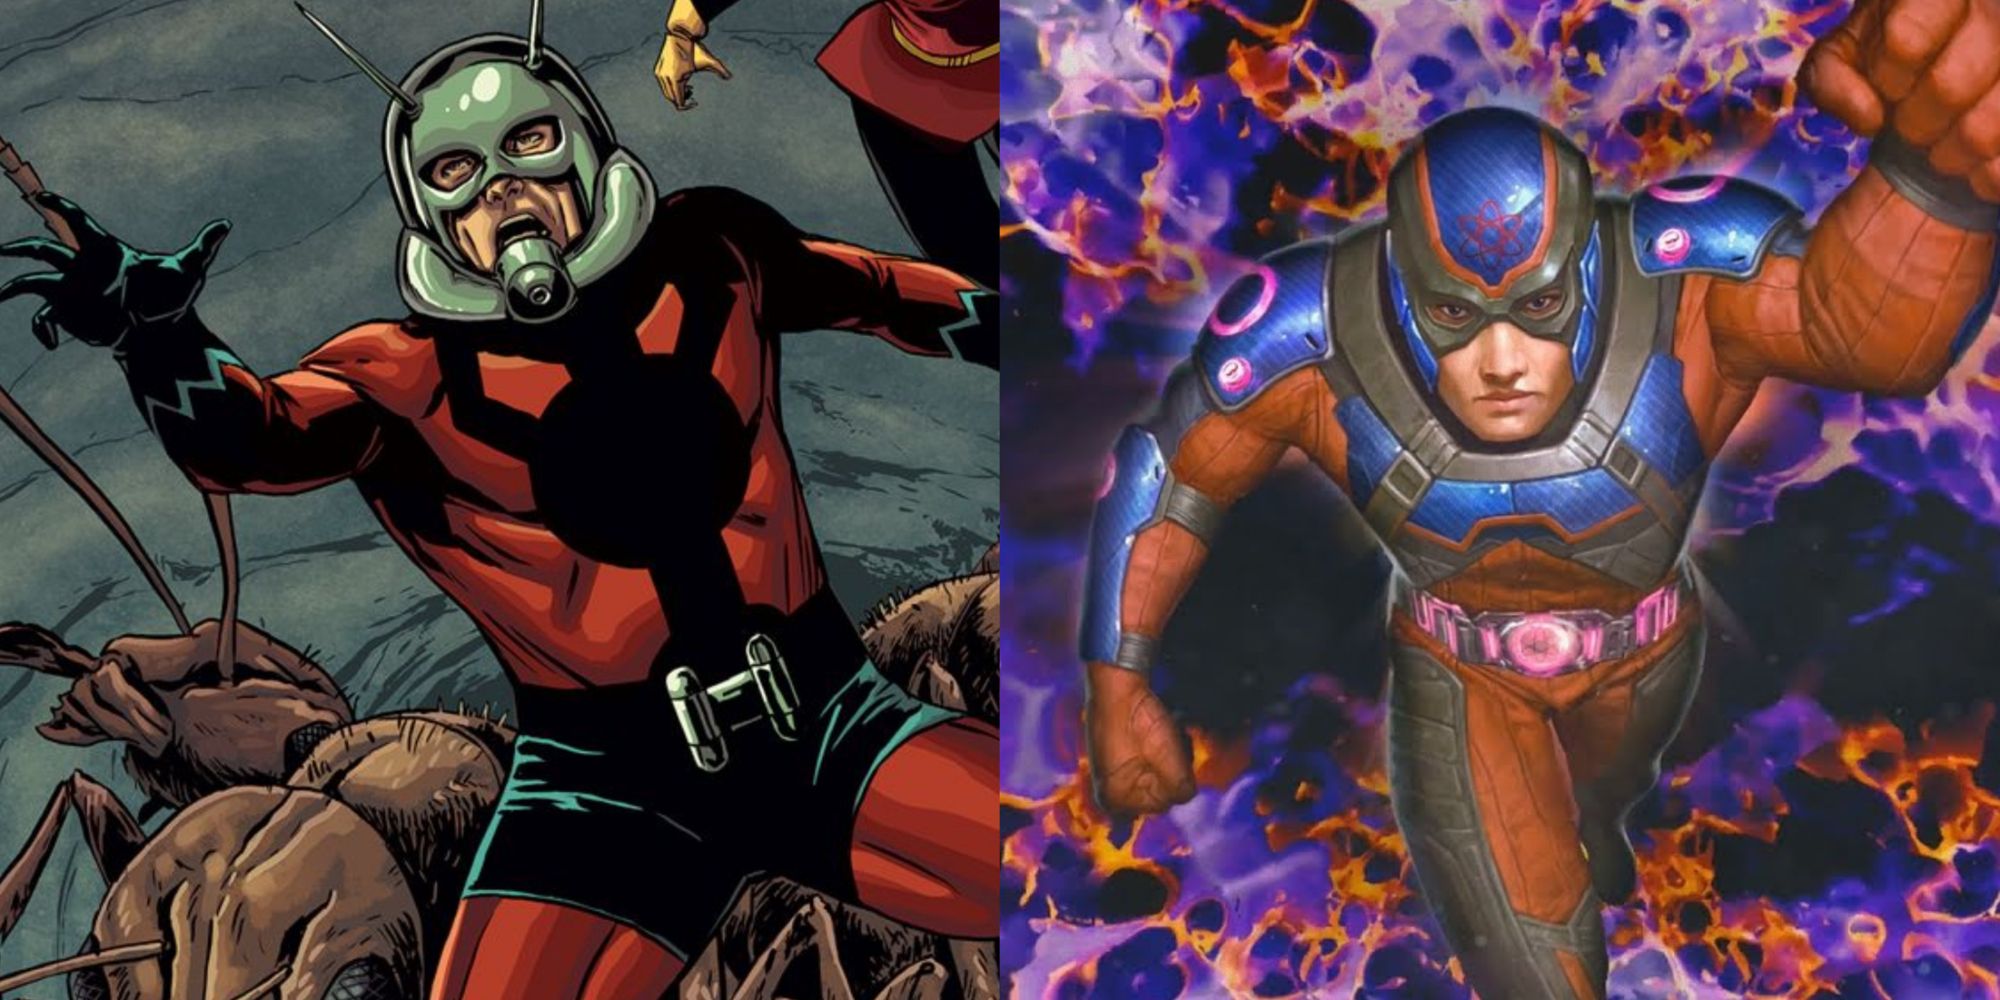 Split image of Ant-Man and The Atom on adventures in DC Comics